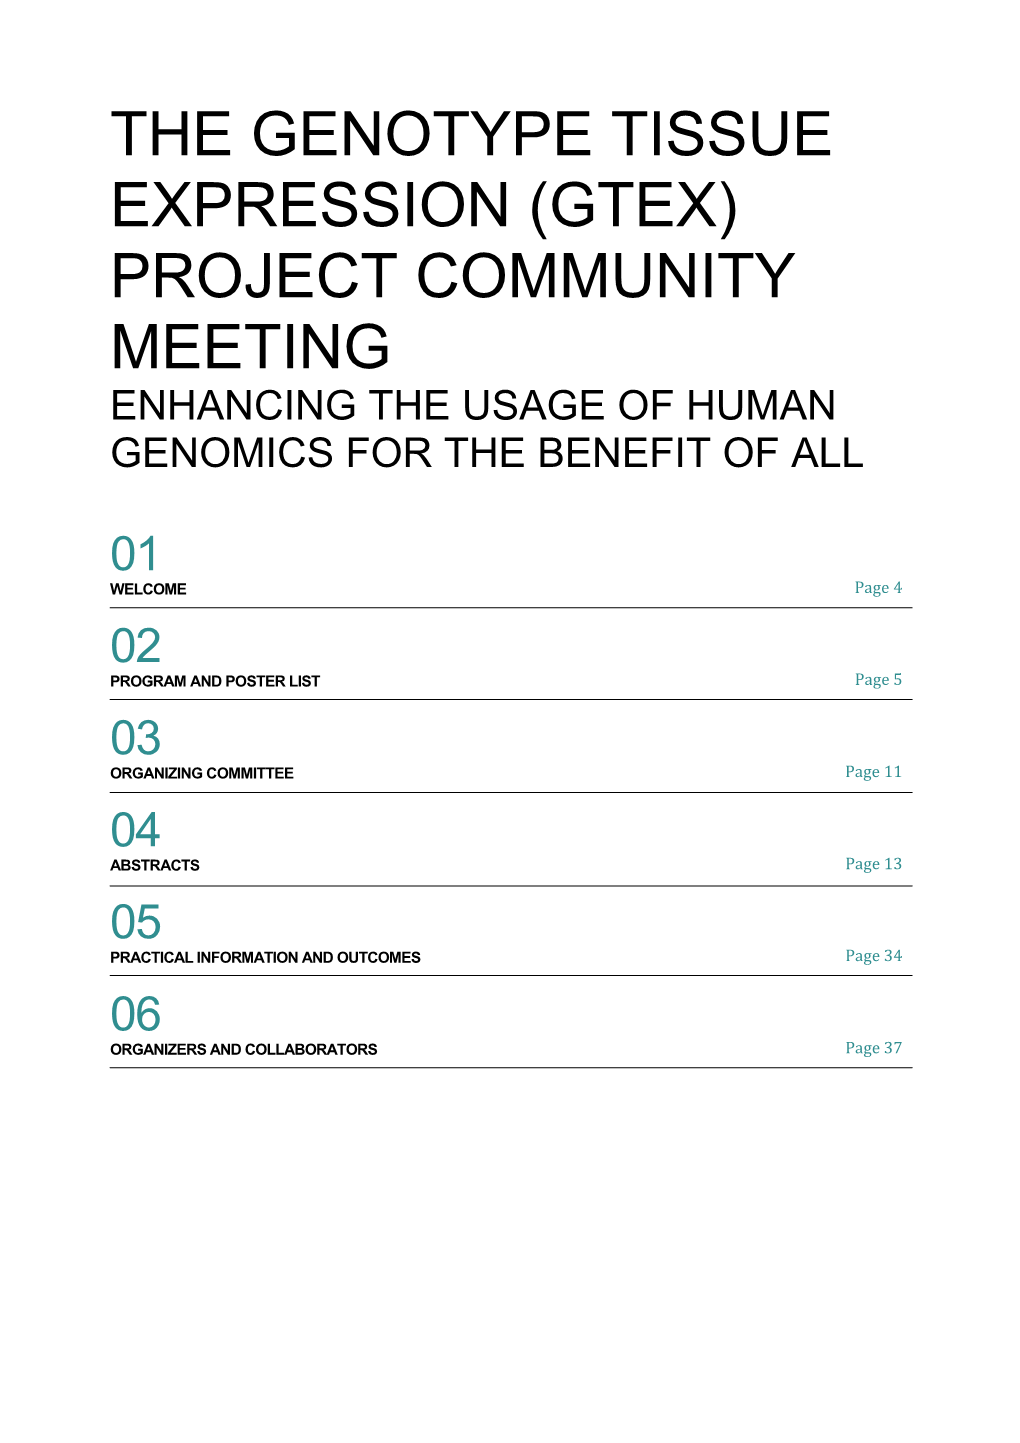 Gtex) Project Community Meeting Enhancing the Usage of Human Genomics for the Benefit of All